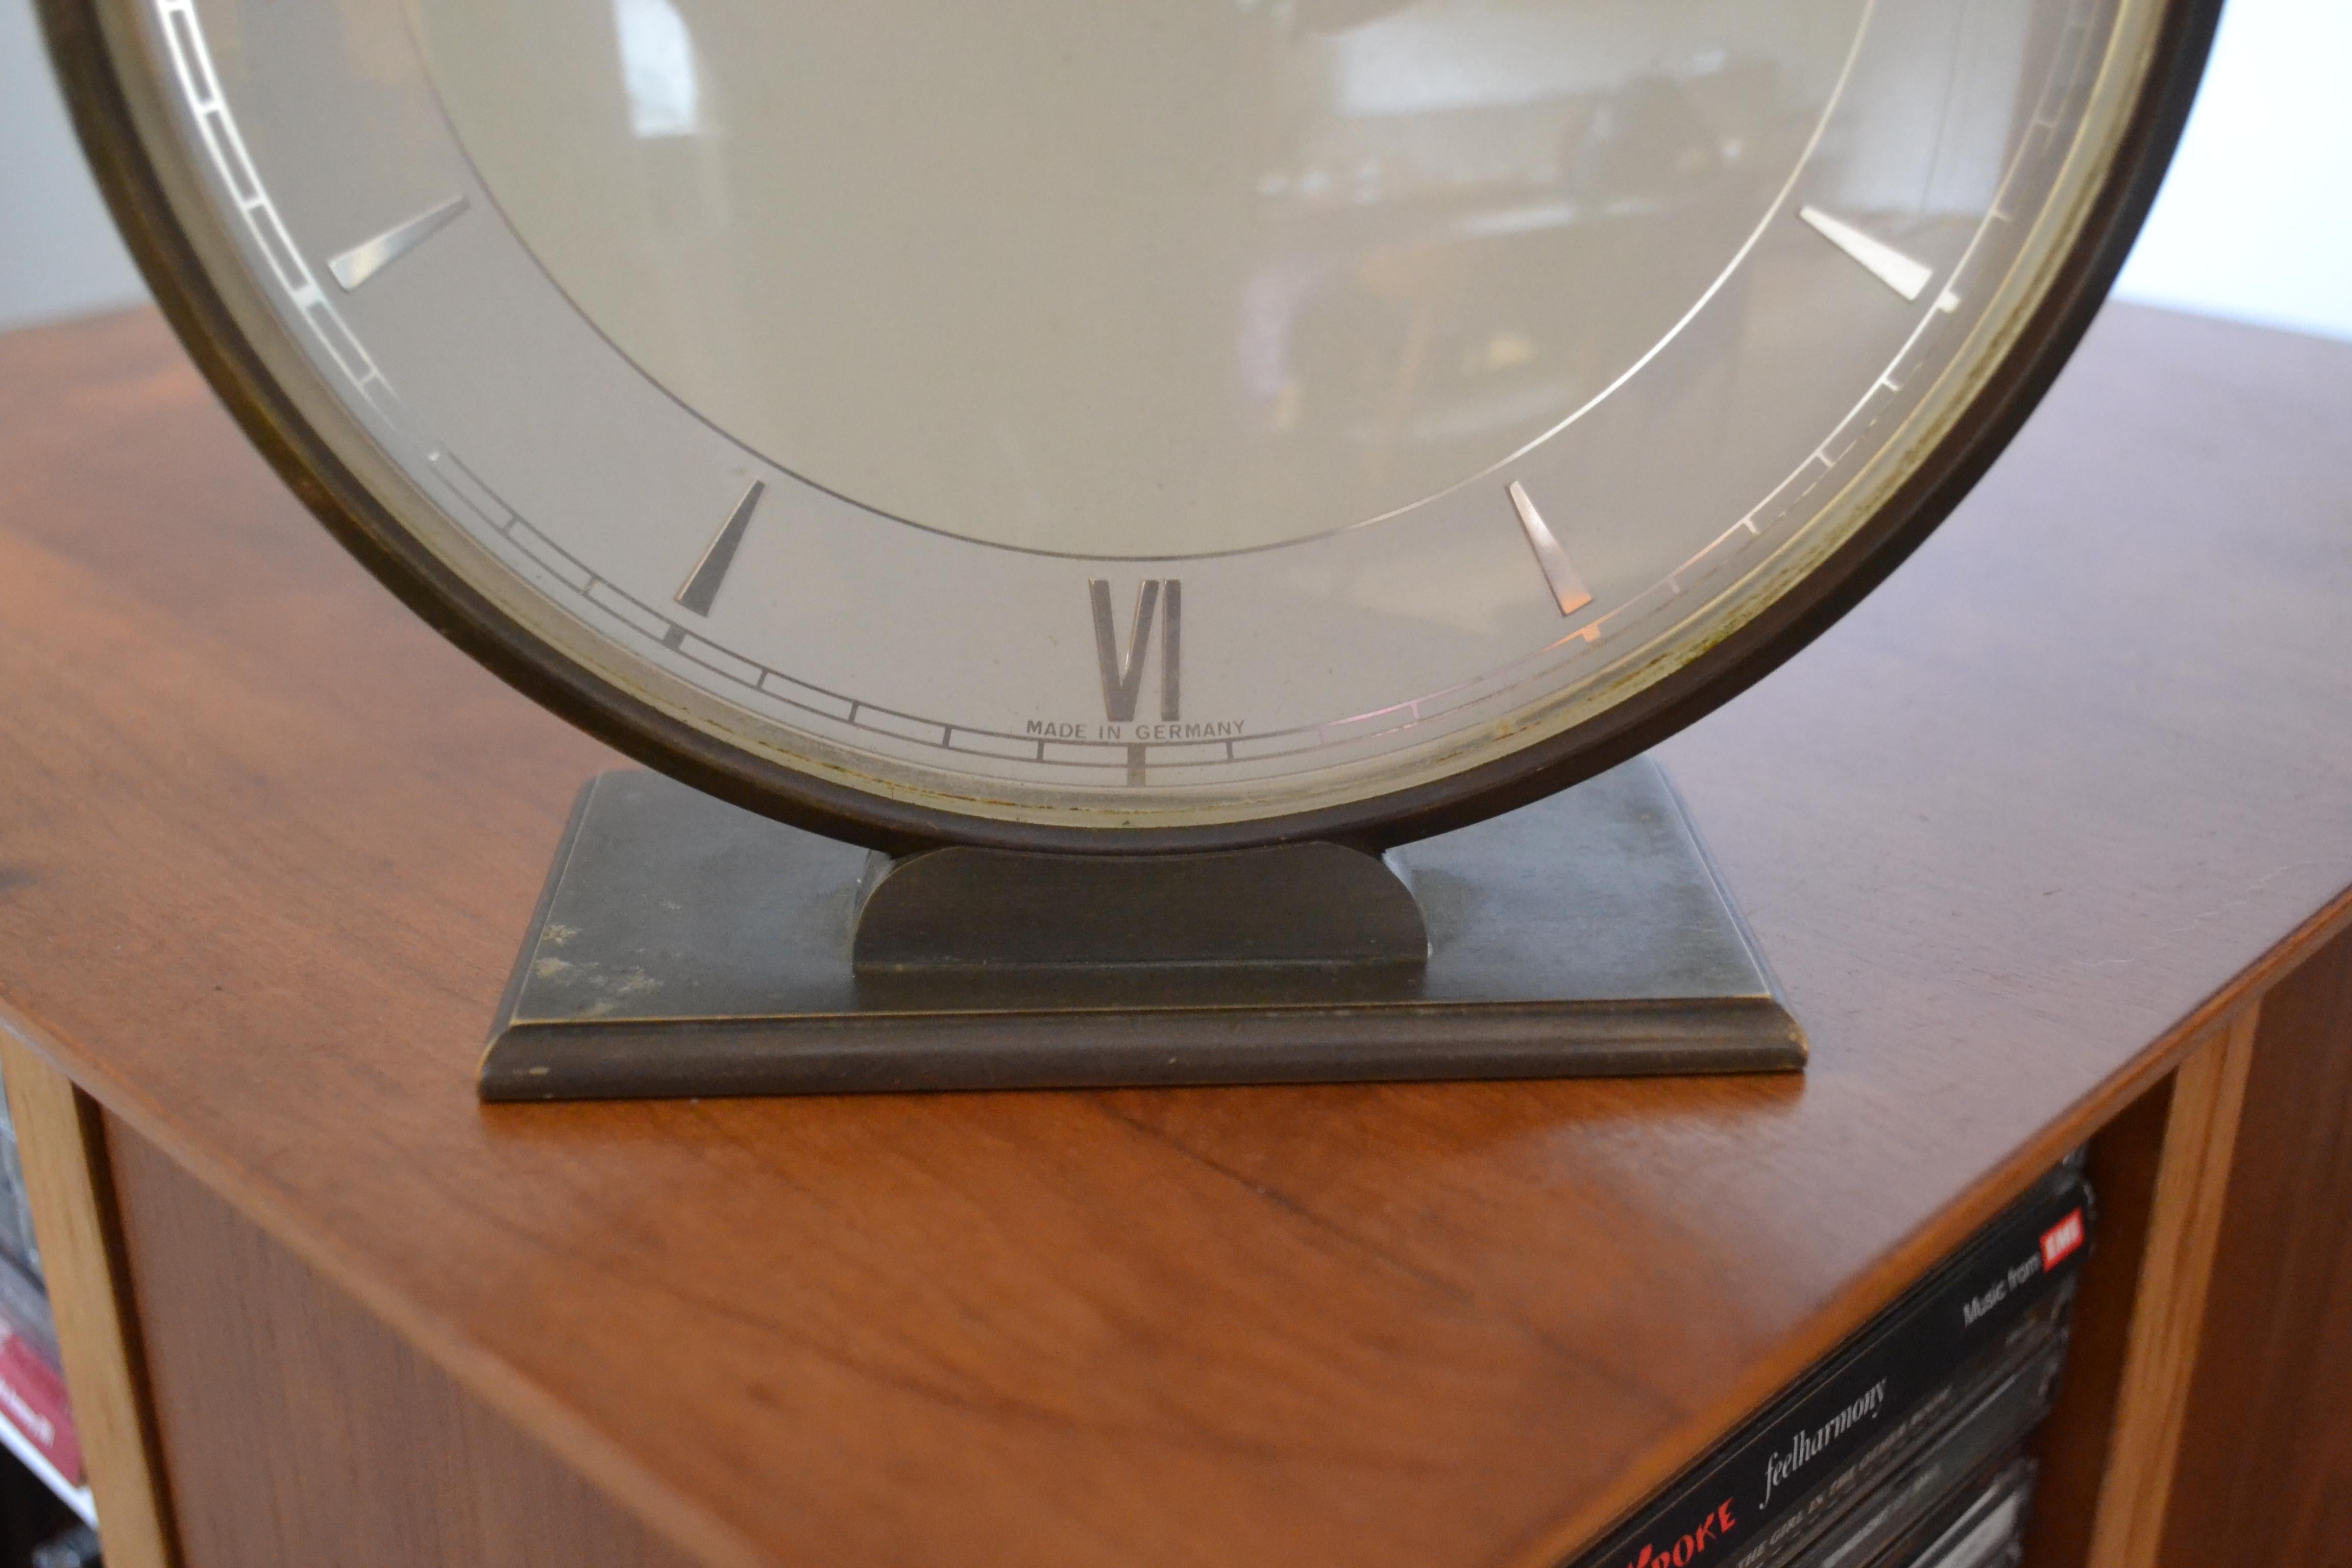 Junghans from the 1950s. Original, signed. The clock is technically efficient. Attractive form.